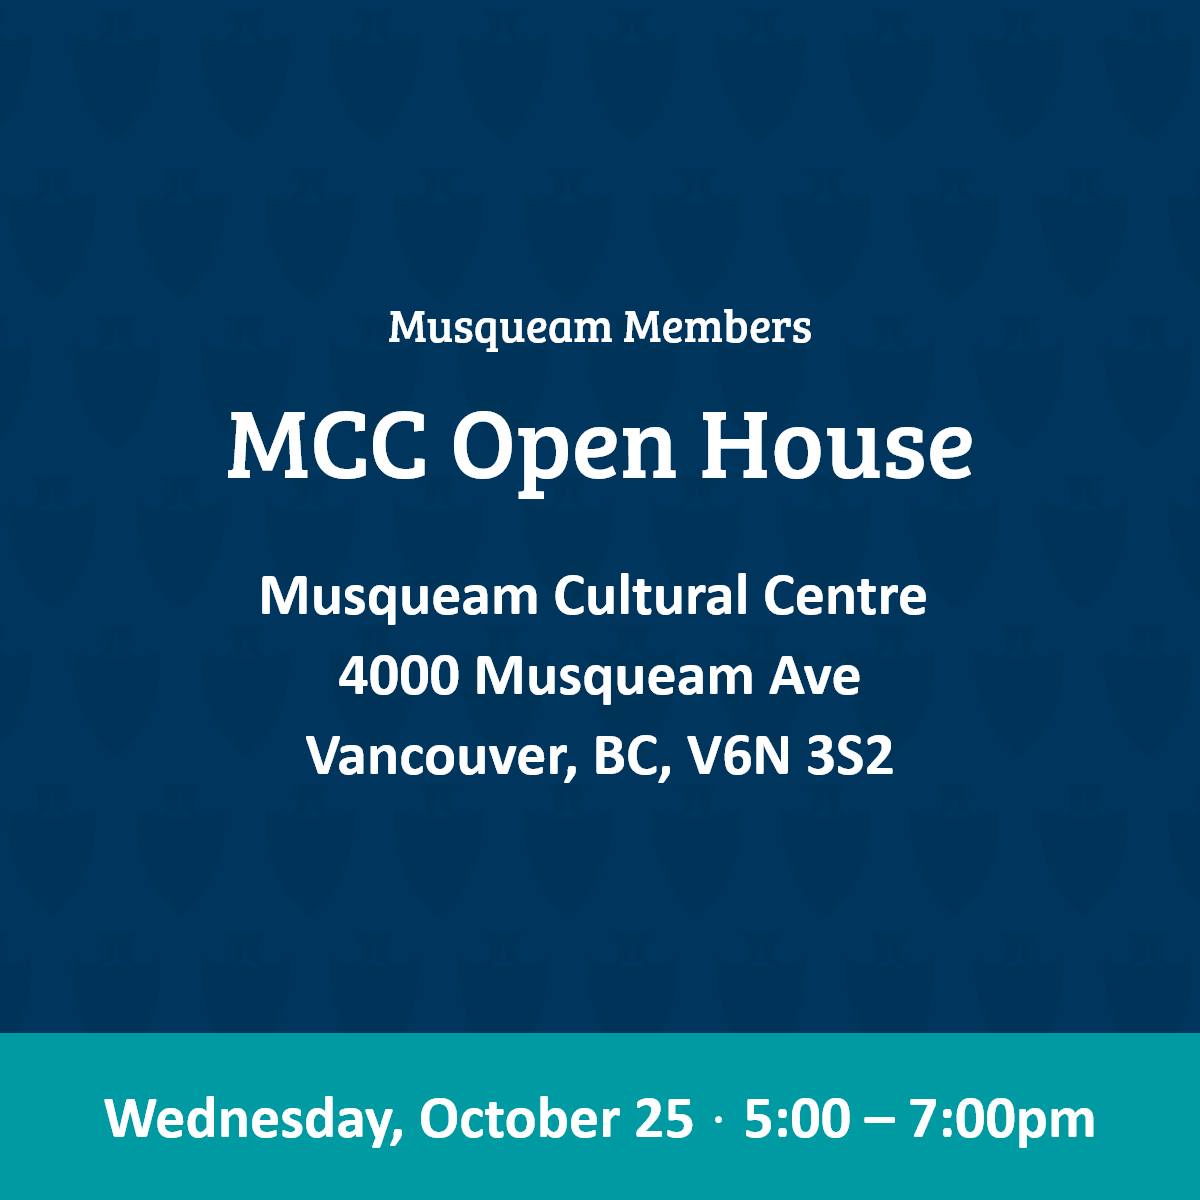 Musqueam Members are invited to the MCC Open House and the Presentation of Audited Financial Statements.Wednesday, October 25thMusqueam Cultural Centre5:00 pm - 7:00 pmEvent details in link in bio.#MusqueamCapitalCorporation #MusqueamCapital